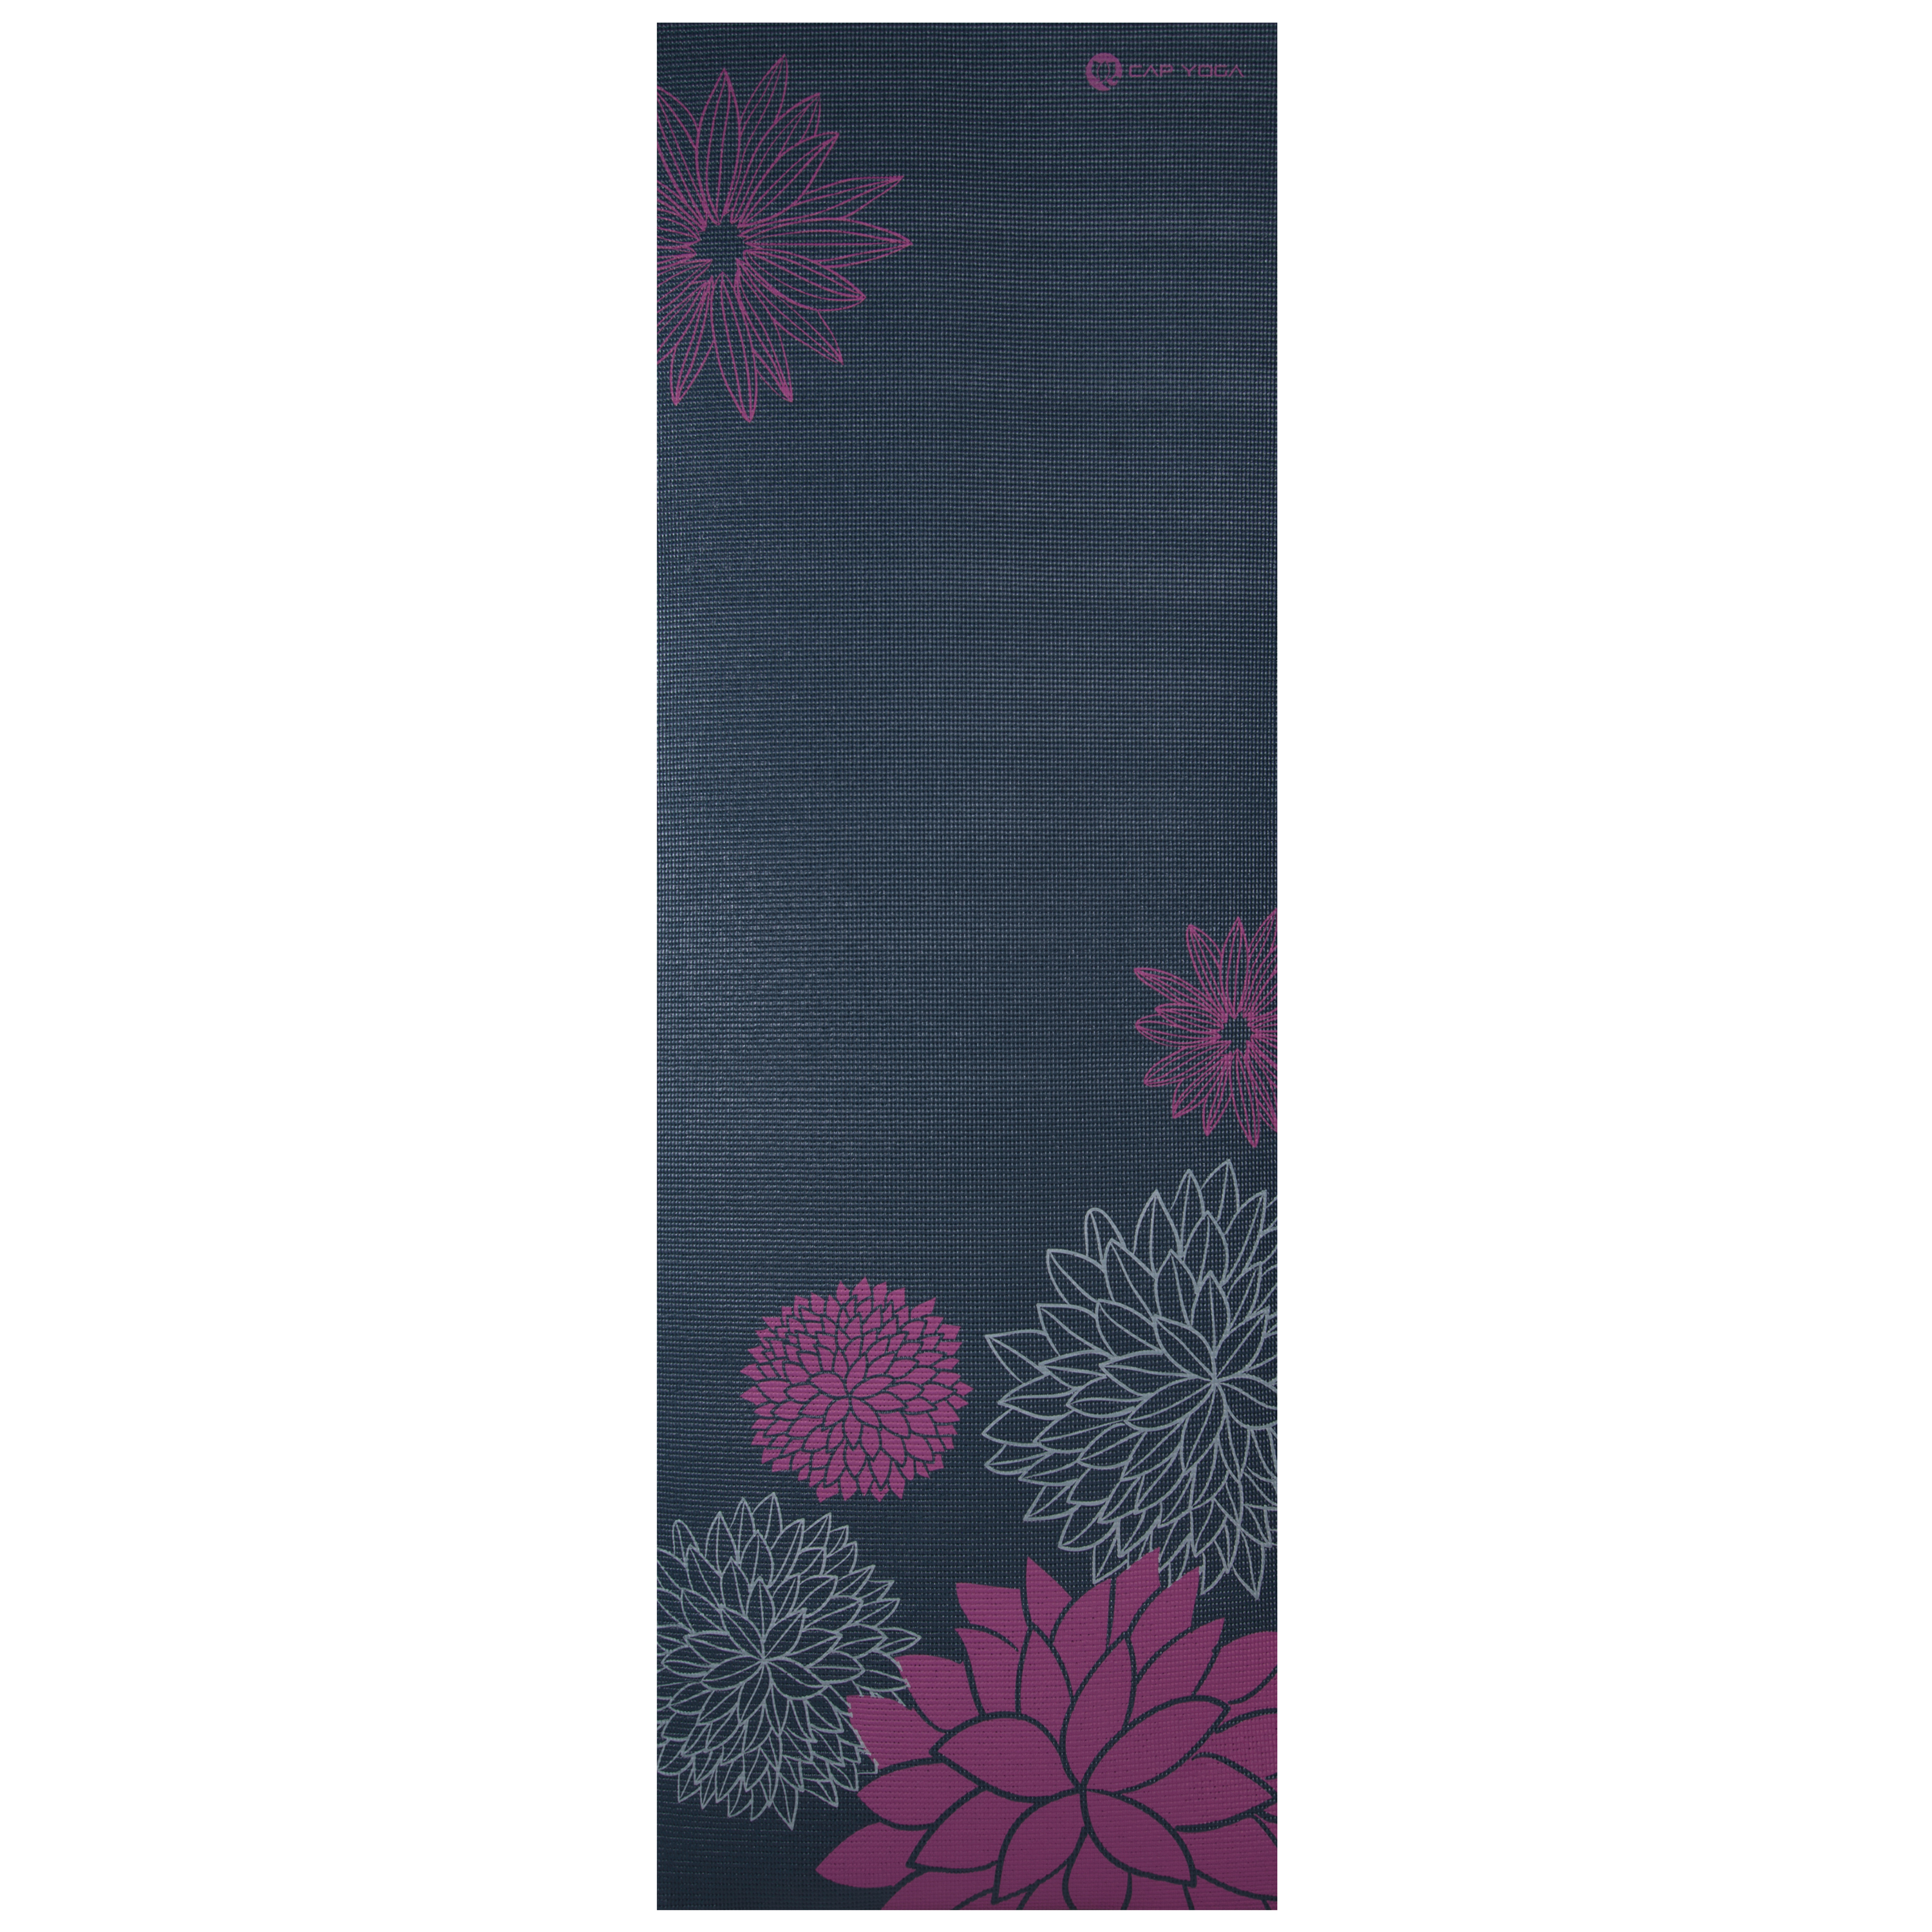 CAP 5mm Yoga Mat with Carry Strap, Dahlia - image 3 of 4